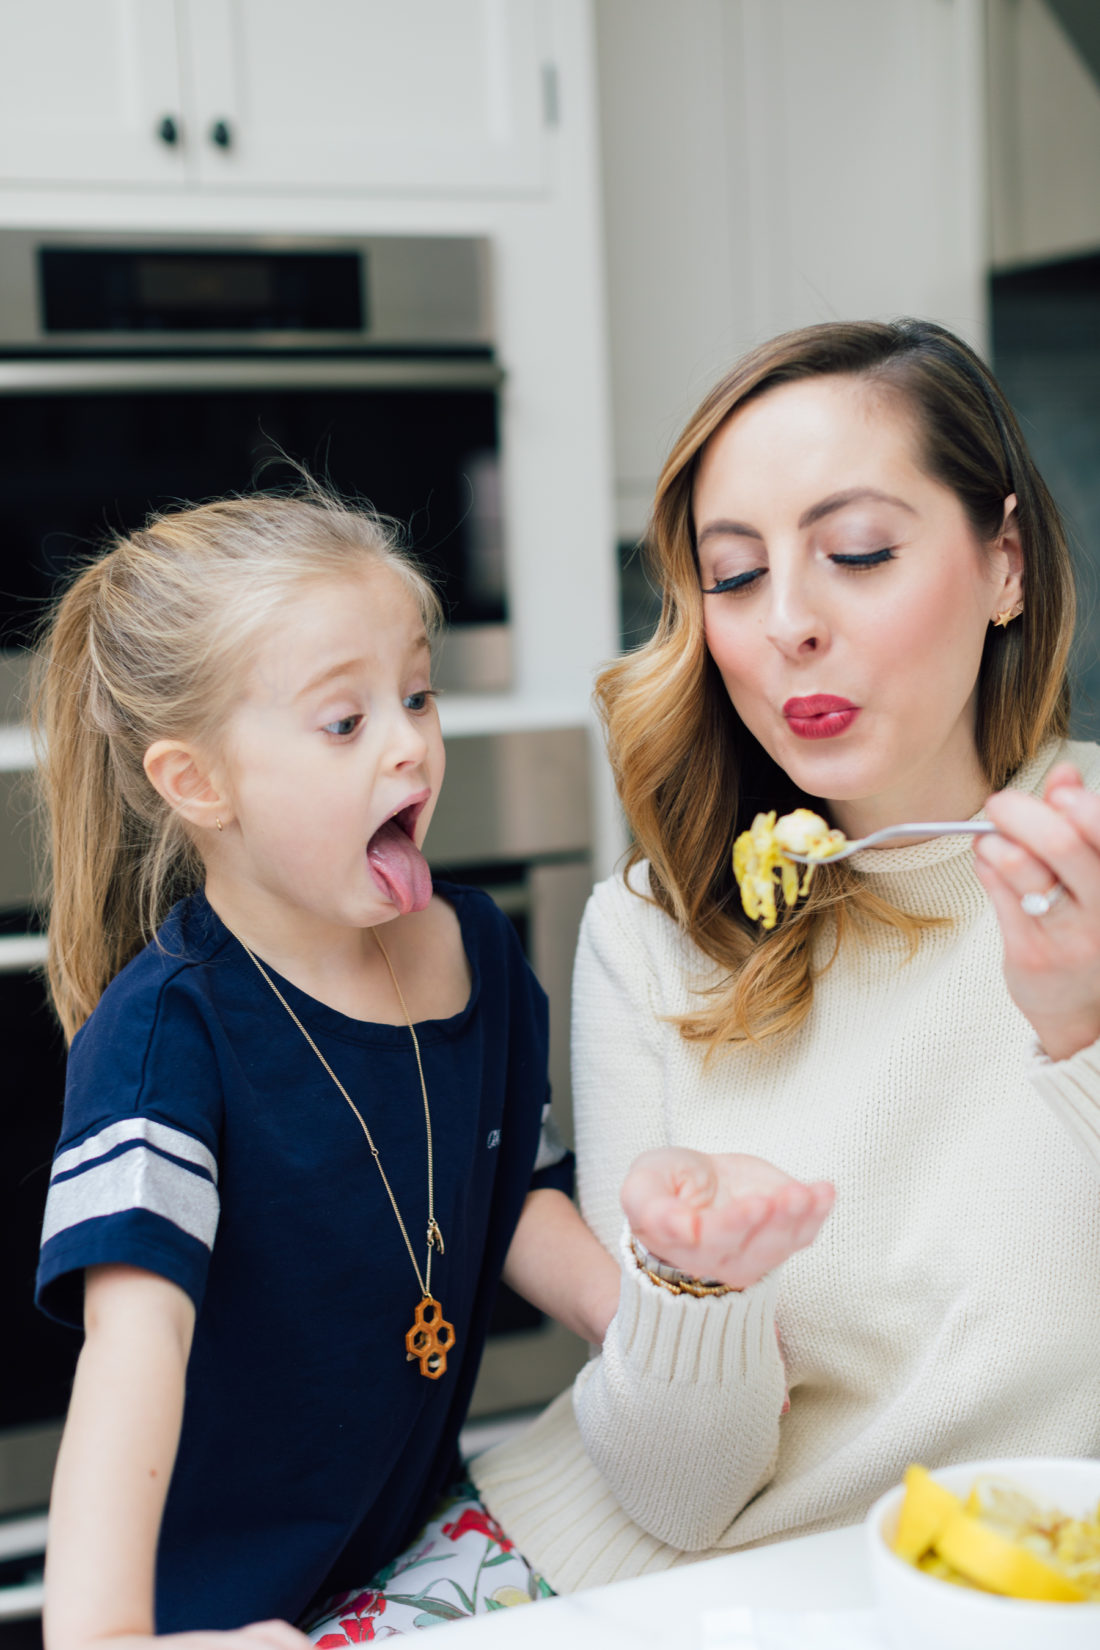 Eva Amurri Martino spoon feeds daughter Marlowe some of her brussels sprouts